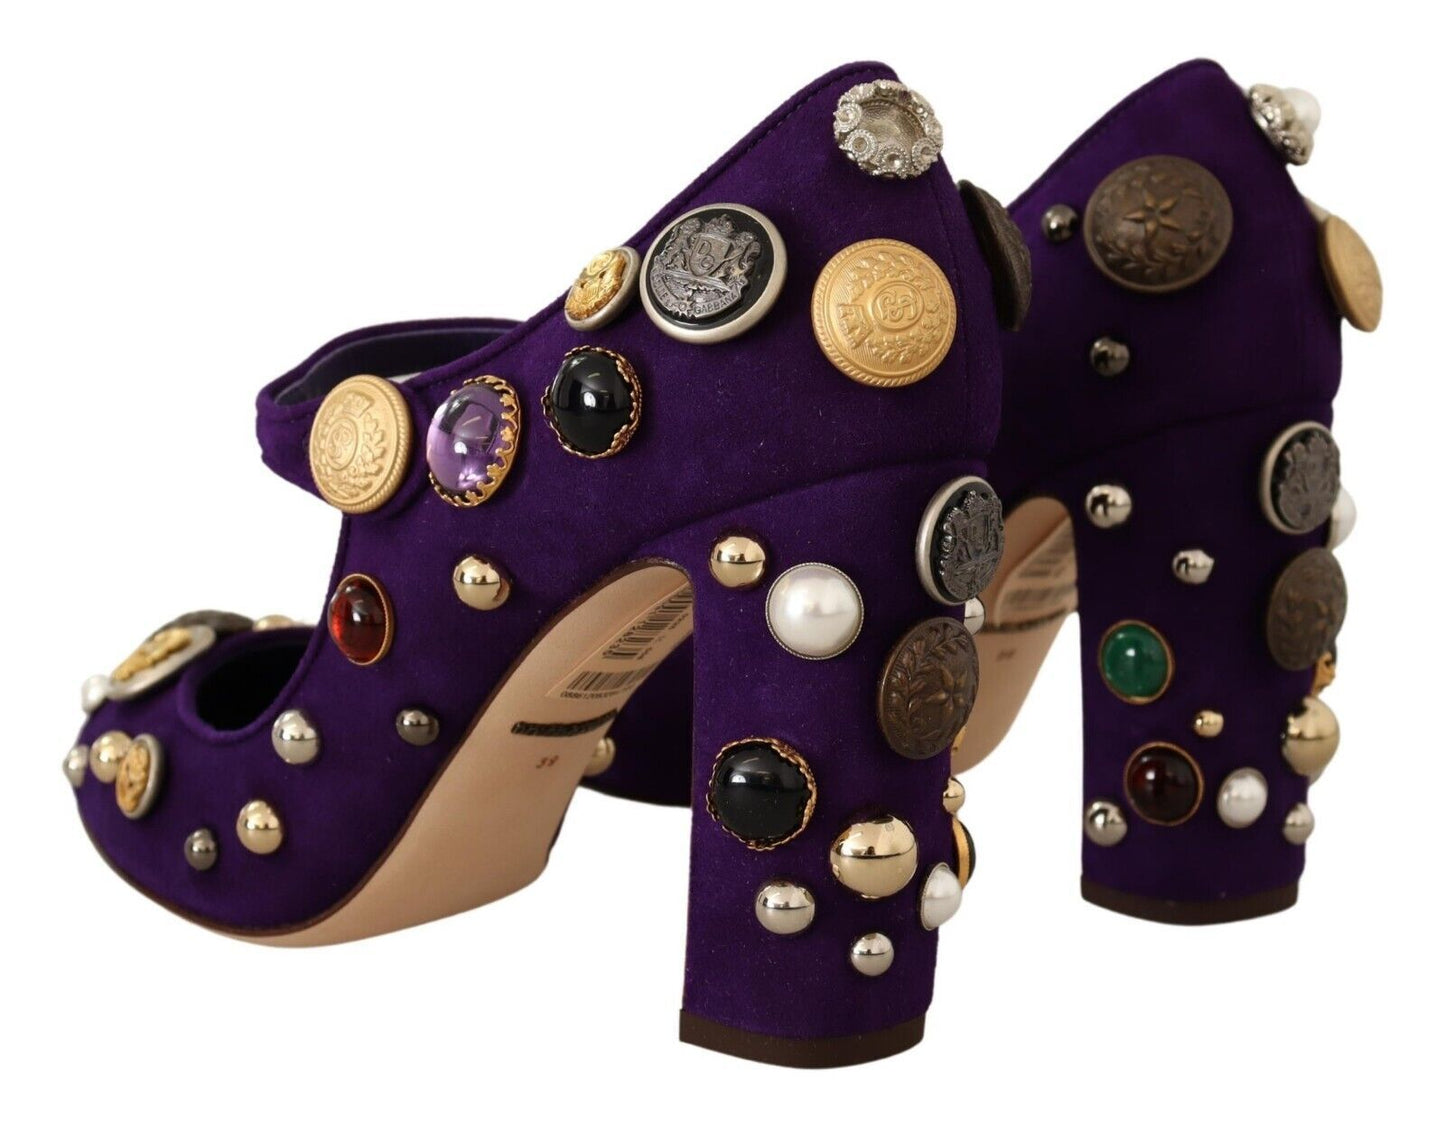 Dolce & Gabbana Purple Suede Embellie Pump Mary Jane Shoes